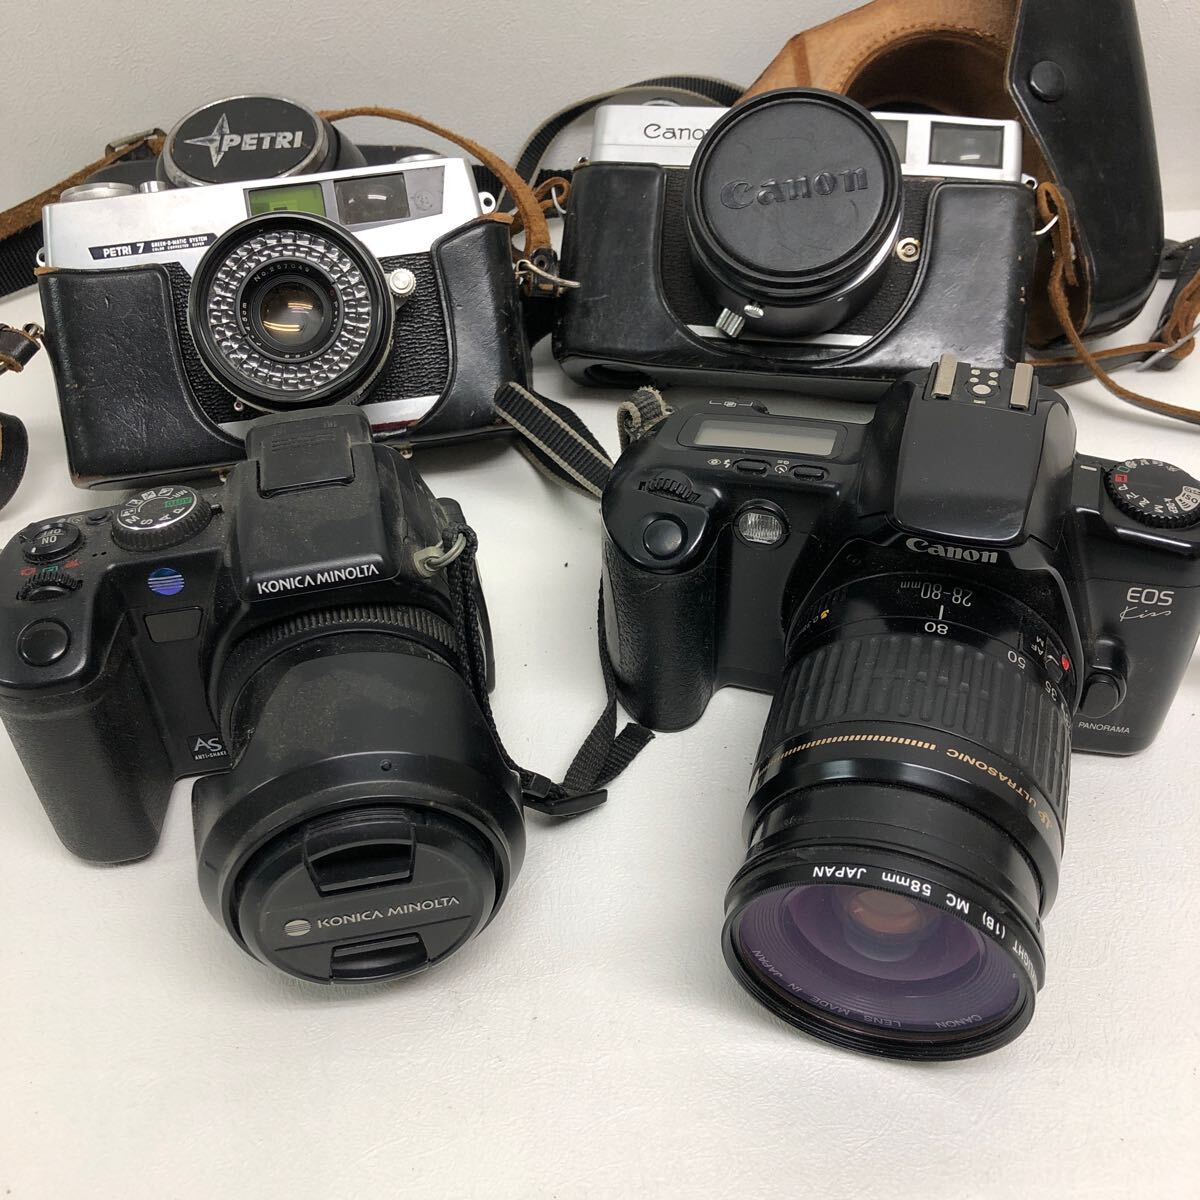 0510P summarize * camera film camera digital camera single‐lens reflex Polaroid lens other 35 point and more / Canon / MINOLTA / PENTAX other present condition delivery 